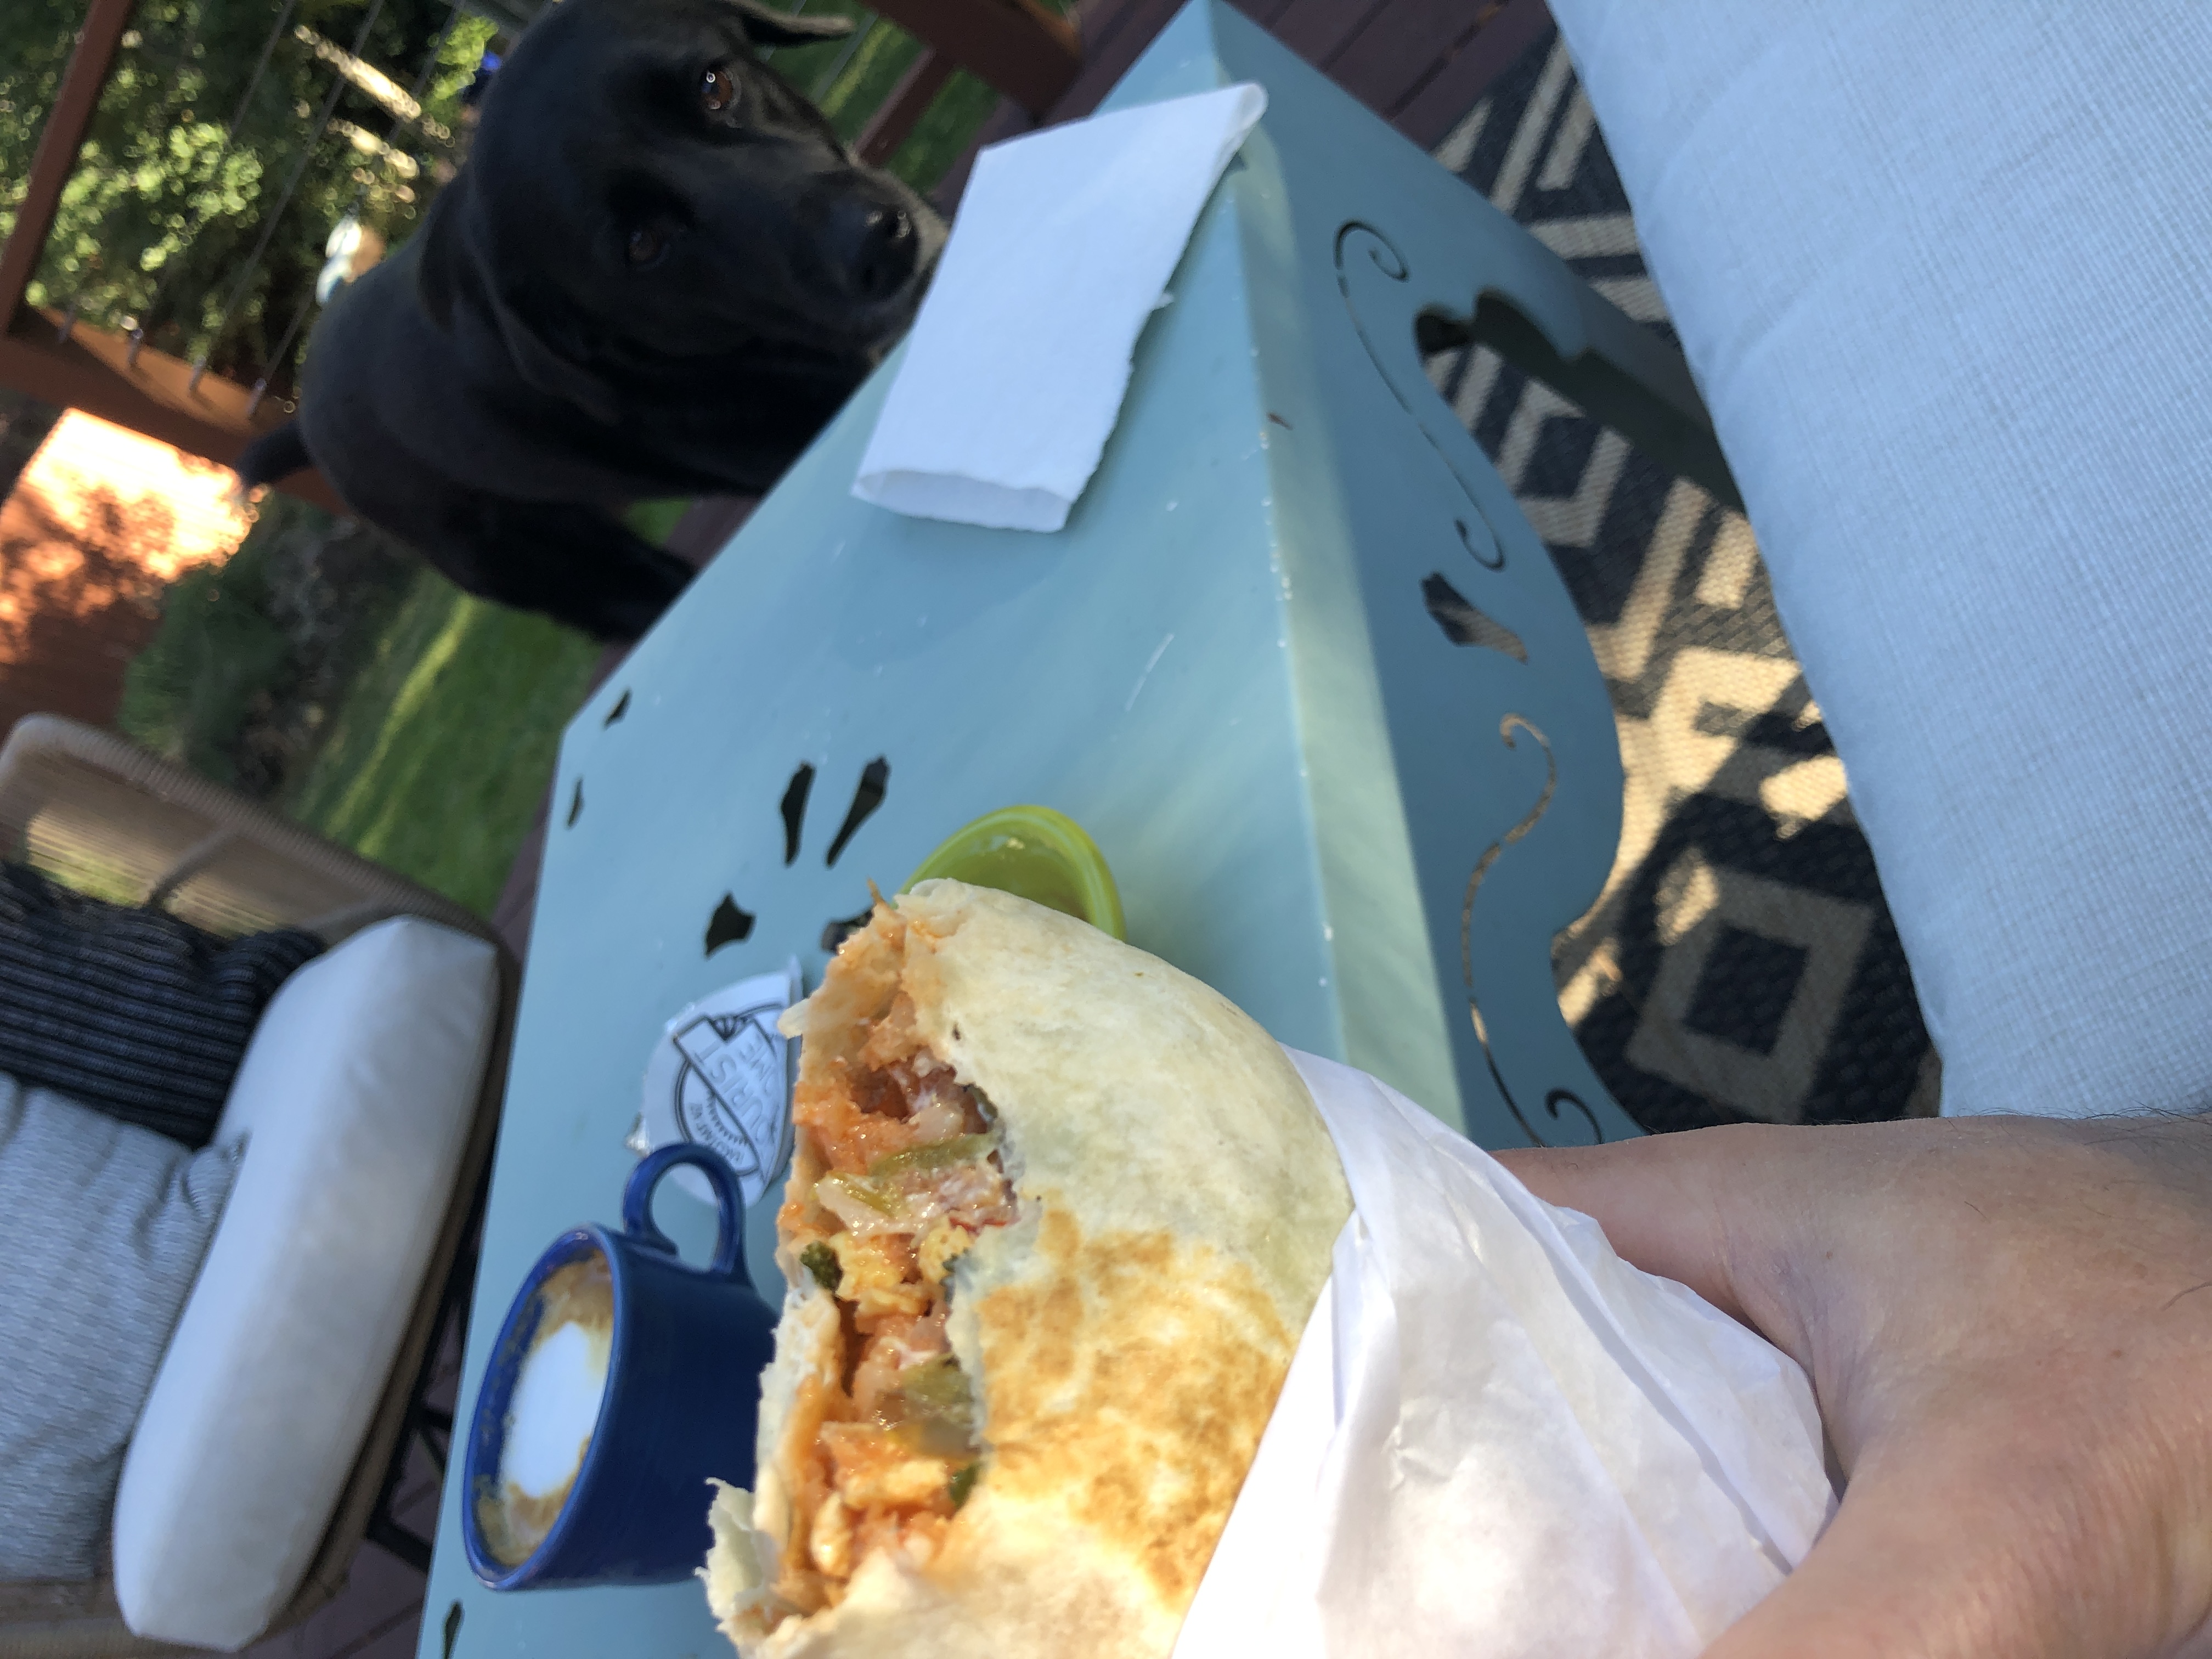 A partially eaten burrito held in a hand, with a coffee cup behind it on an outdoor patio table. Beside the table a black dog eyes the food alertly. 